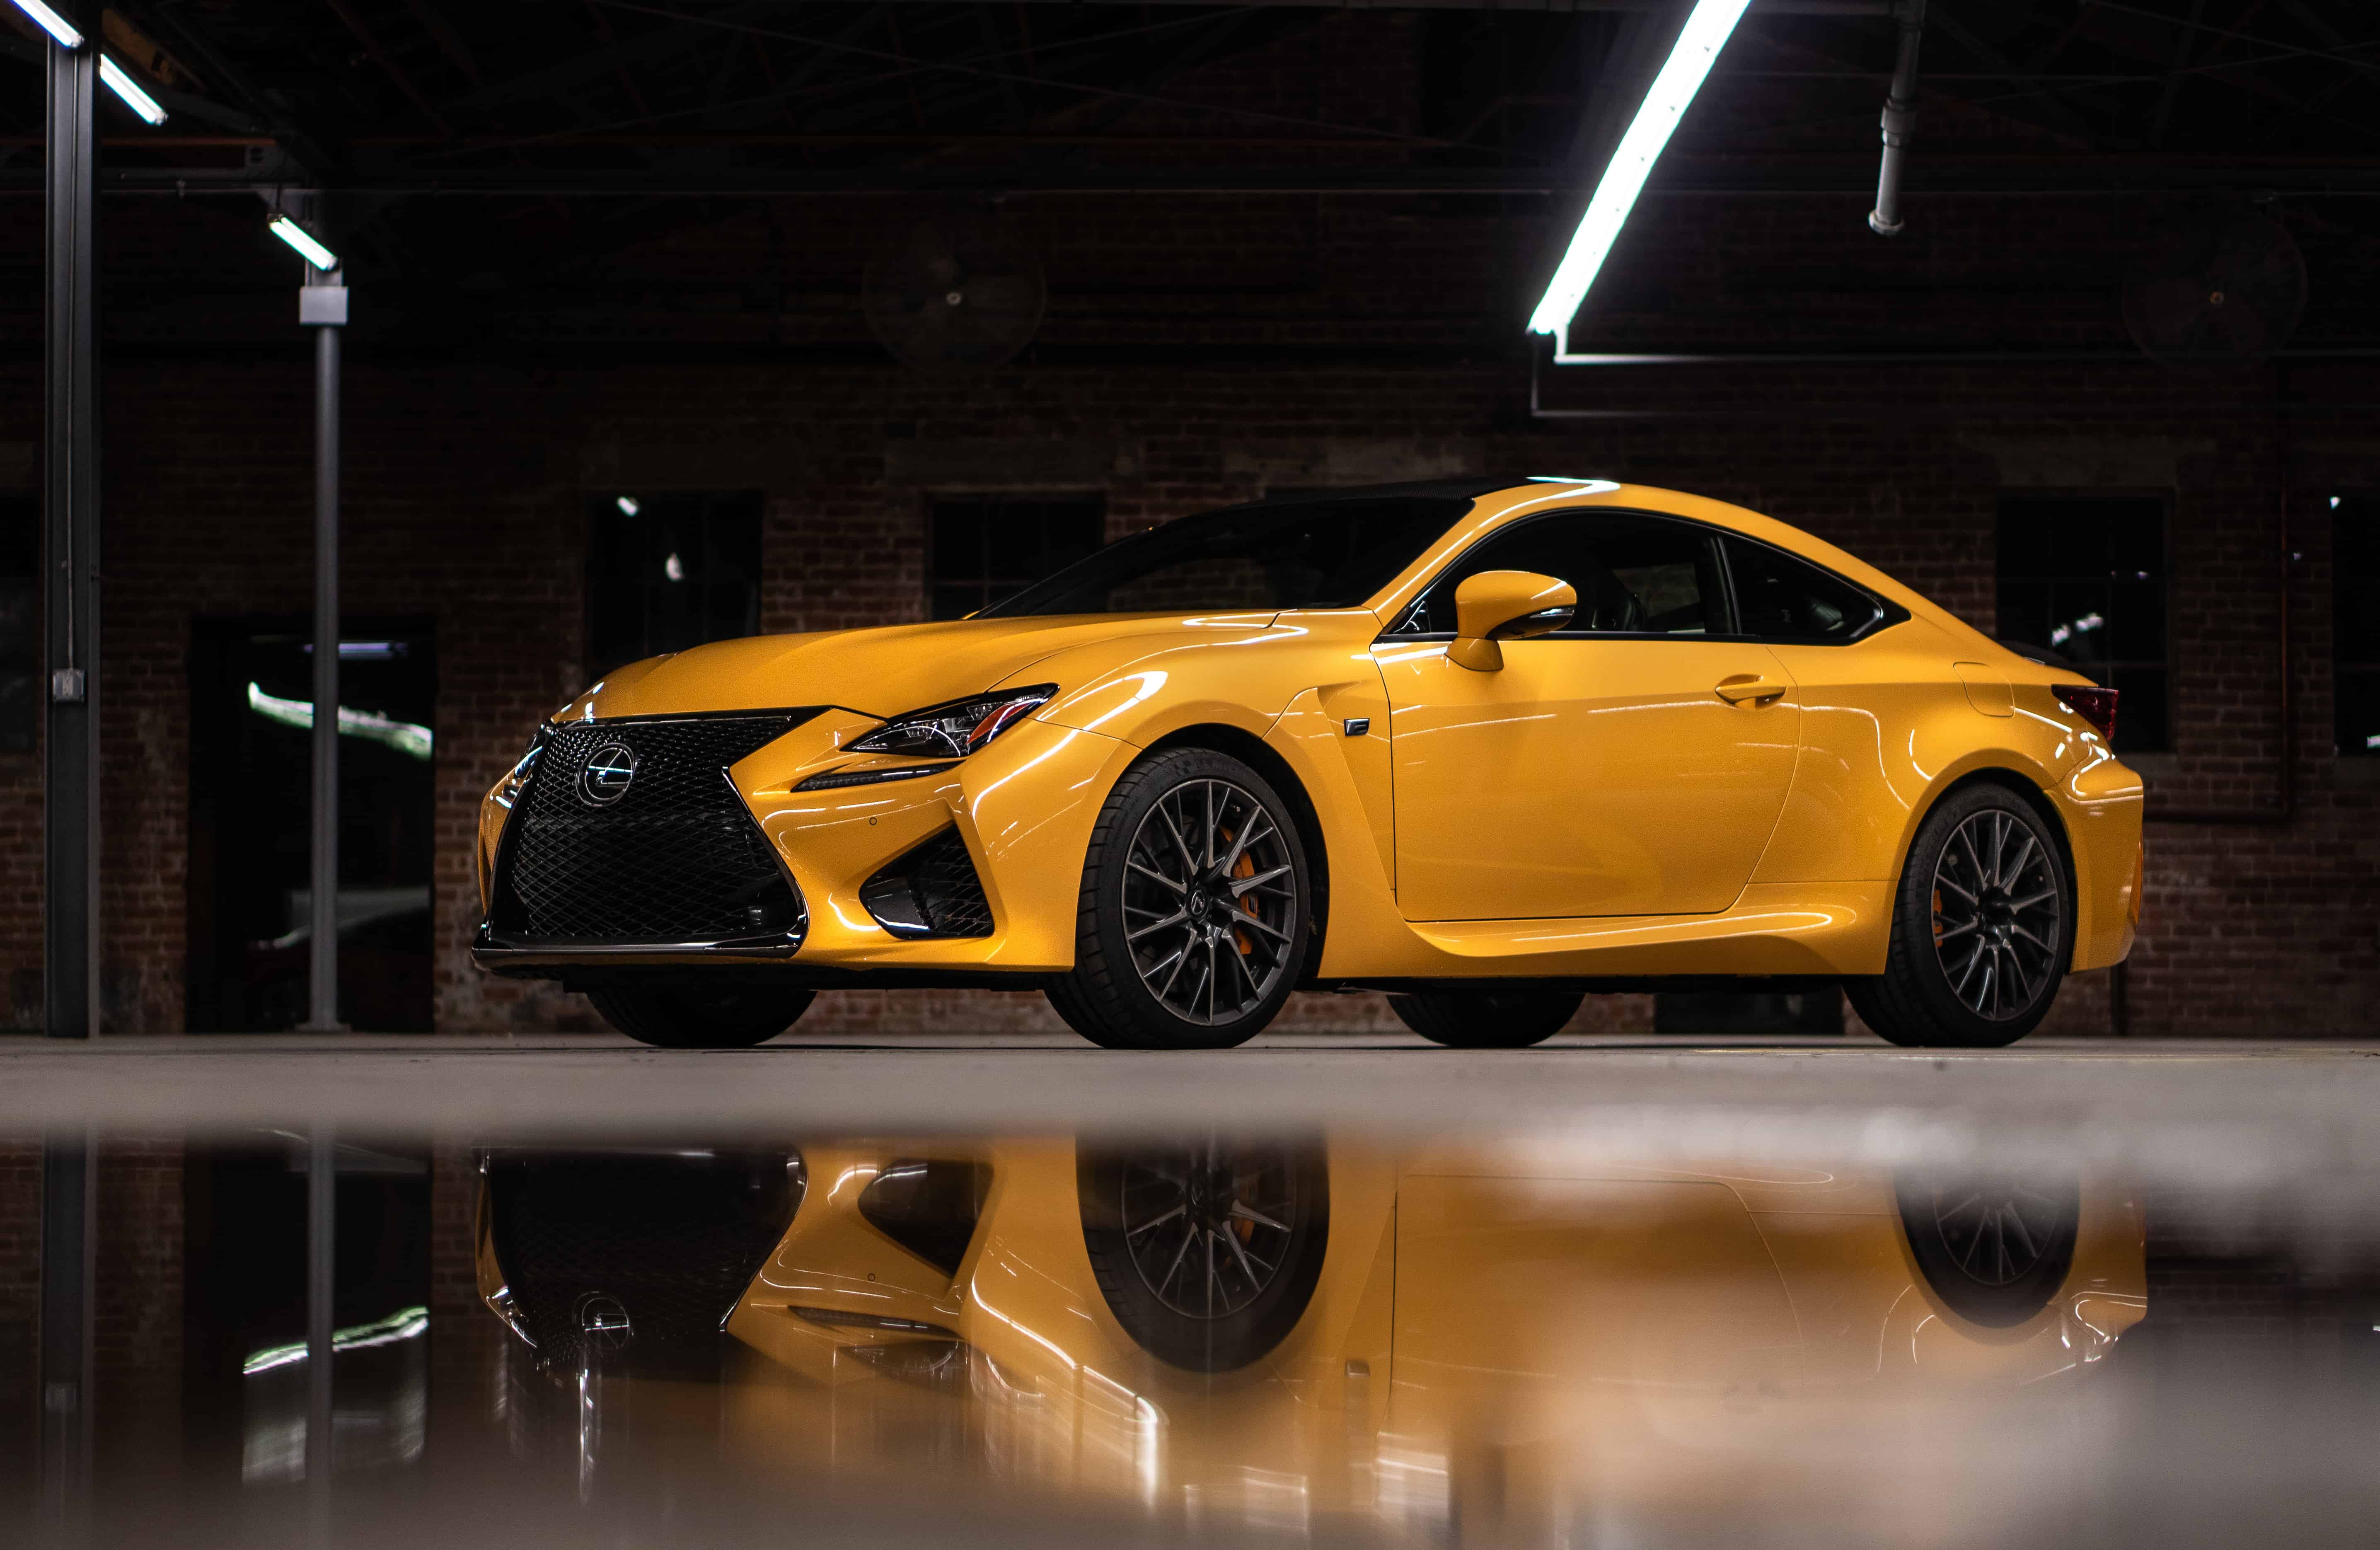 The 2019 Lexus RC-F has great exterior looks, but its performance and interior are falling behind what competitors offer. | Rebecca Nguyen photos